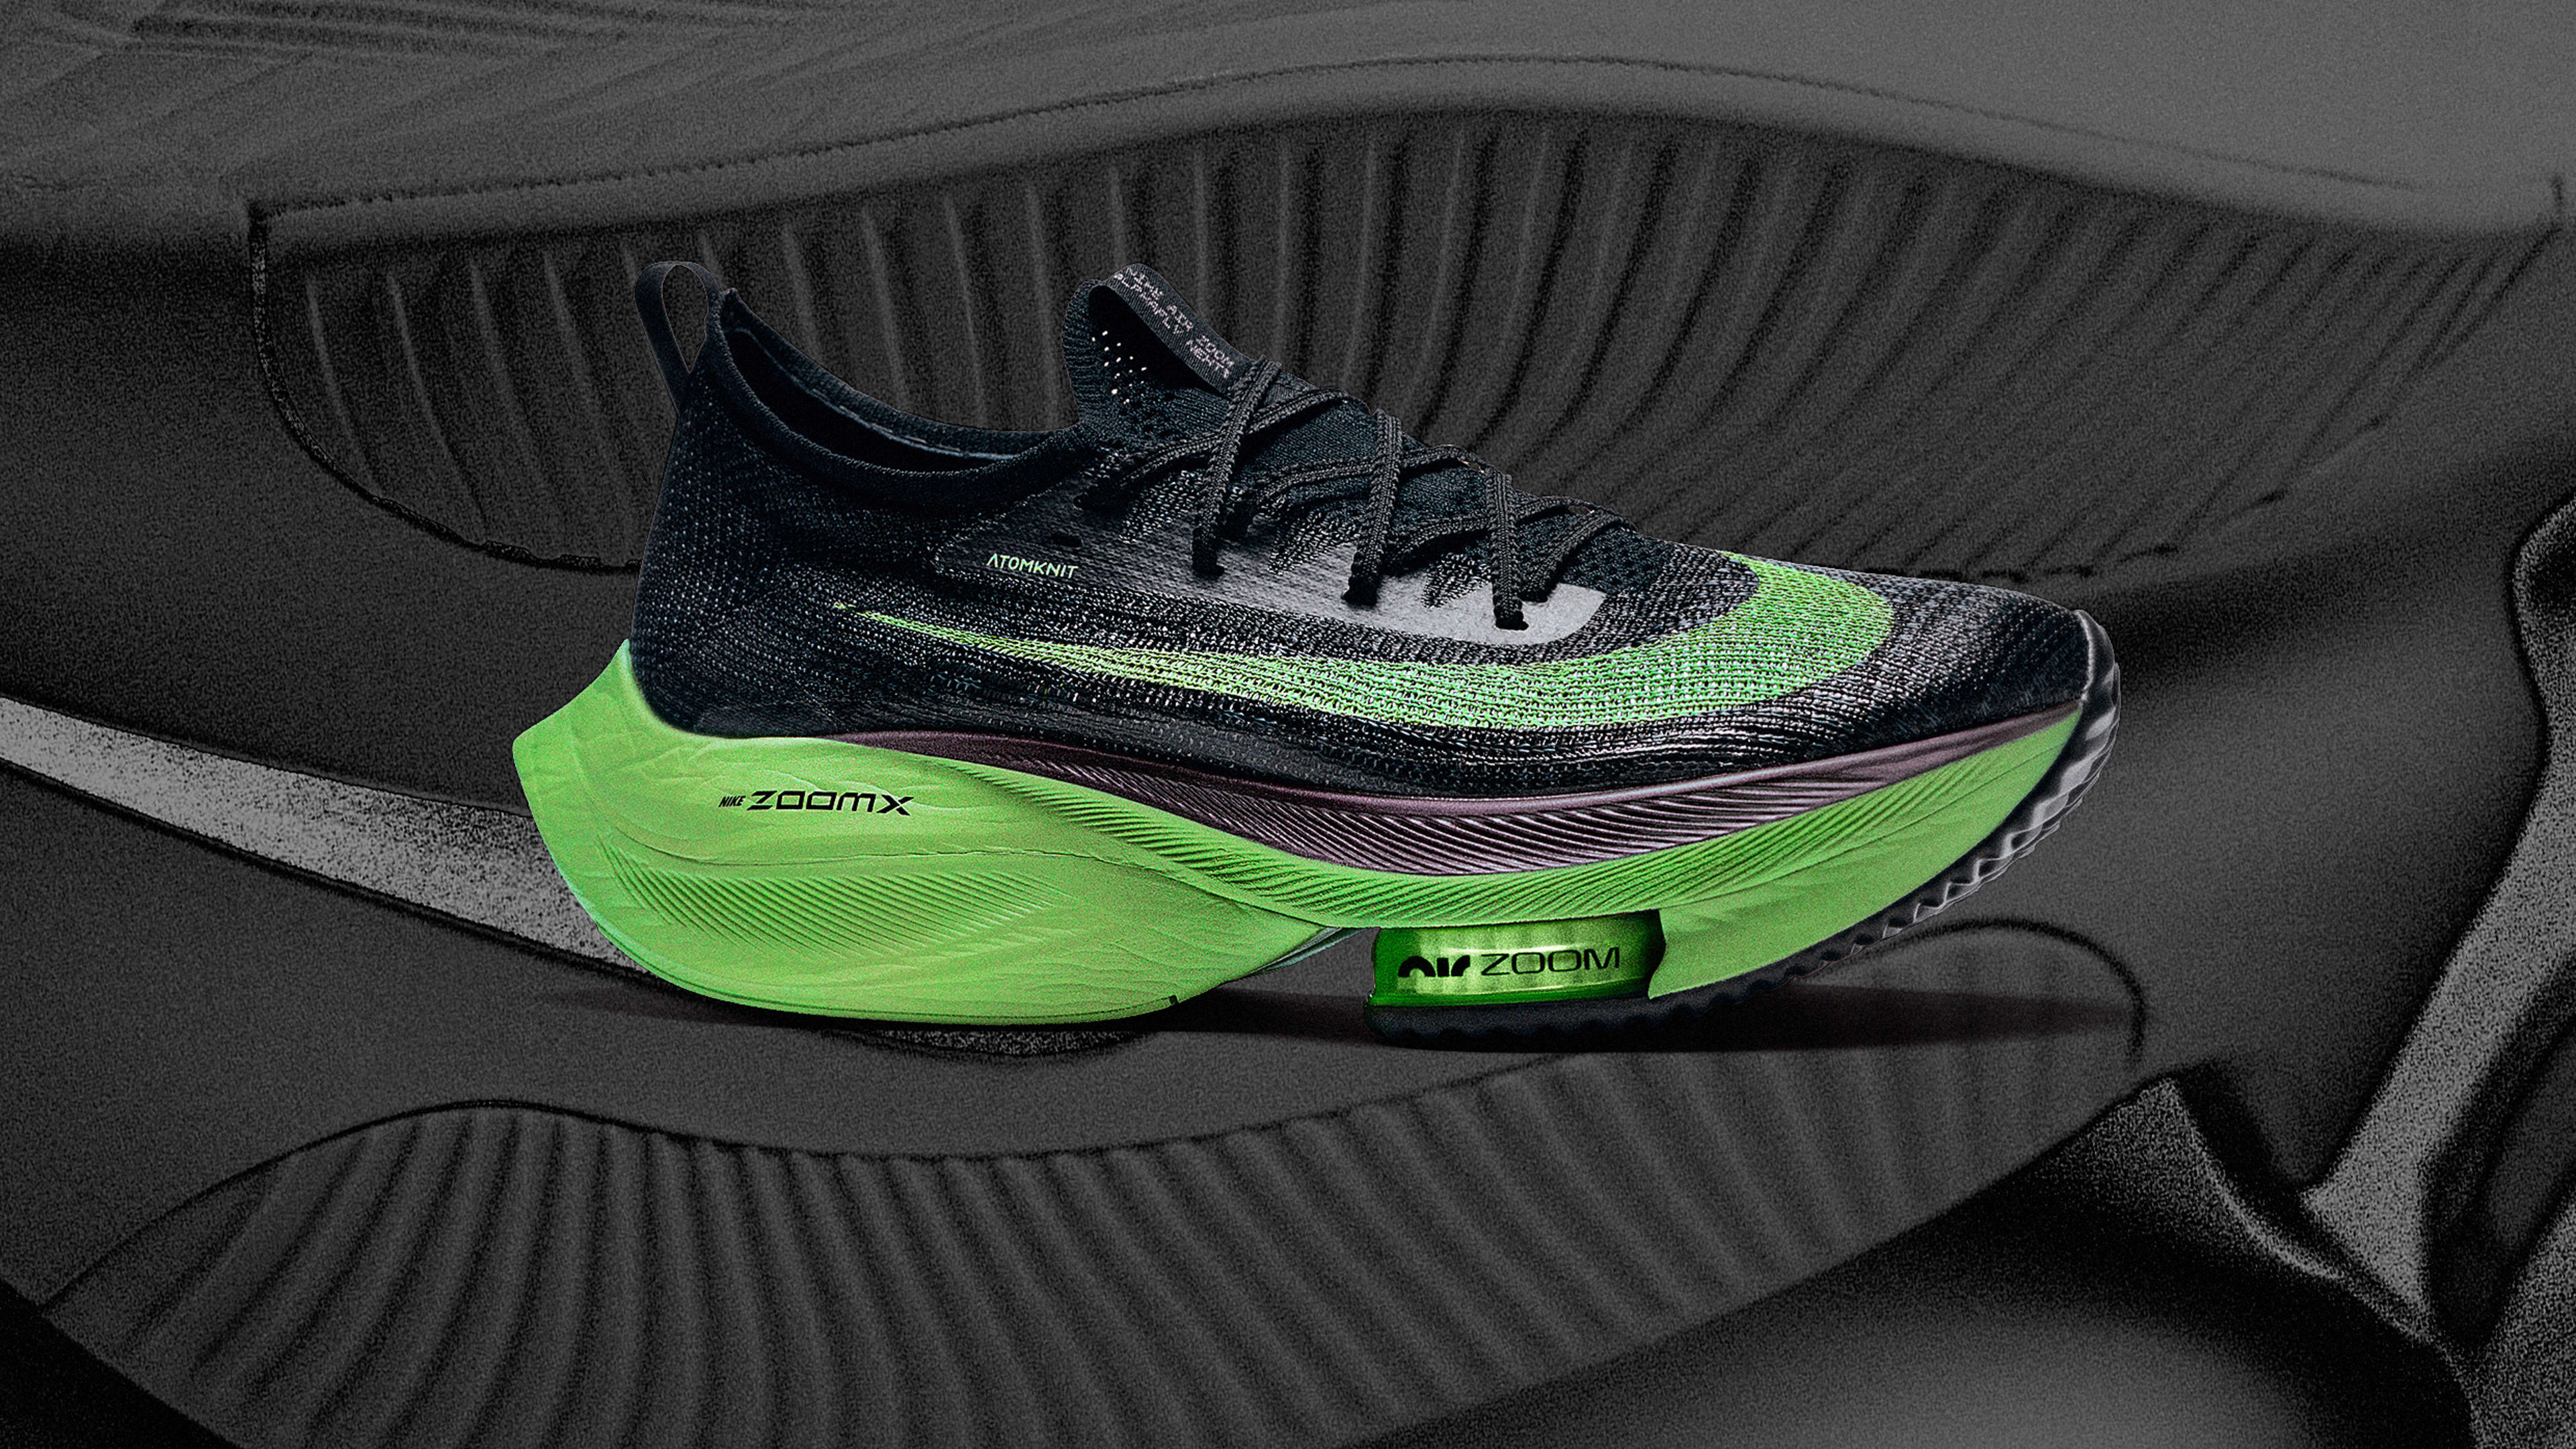 Are Vaporfly shoes too fast? Nike’s head of design responds